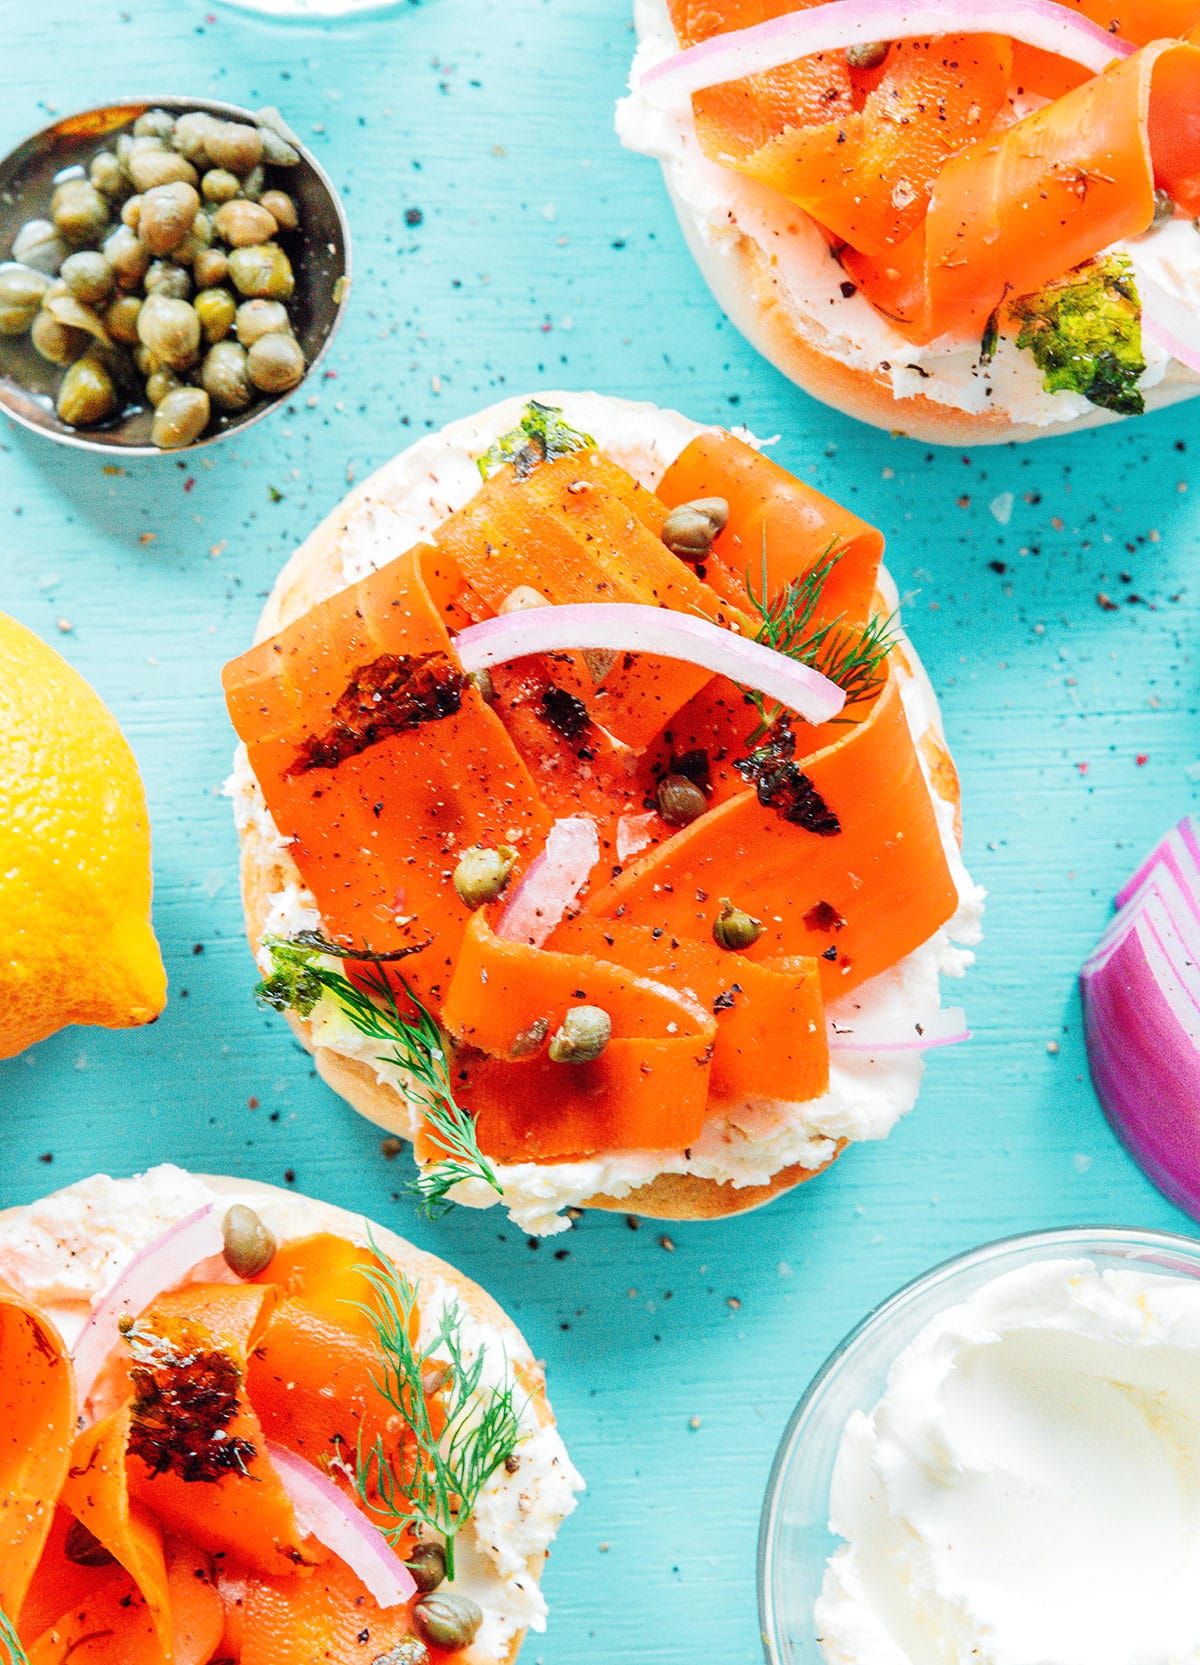 Bagel with cream cheese, carrot lox, capers, and red onions.